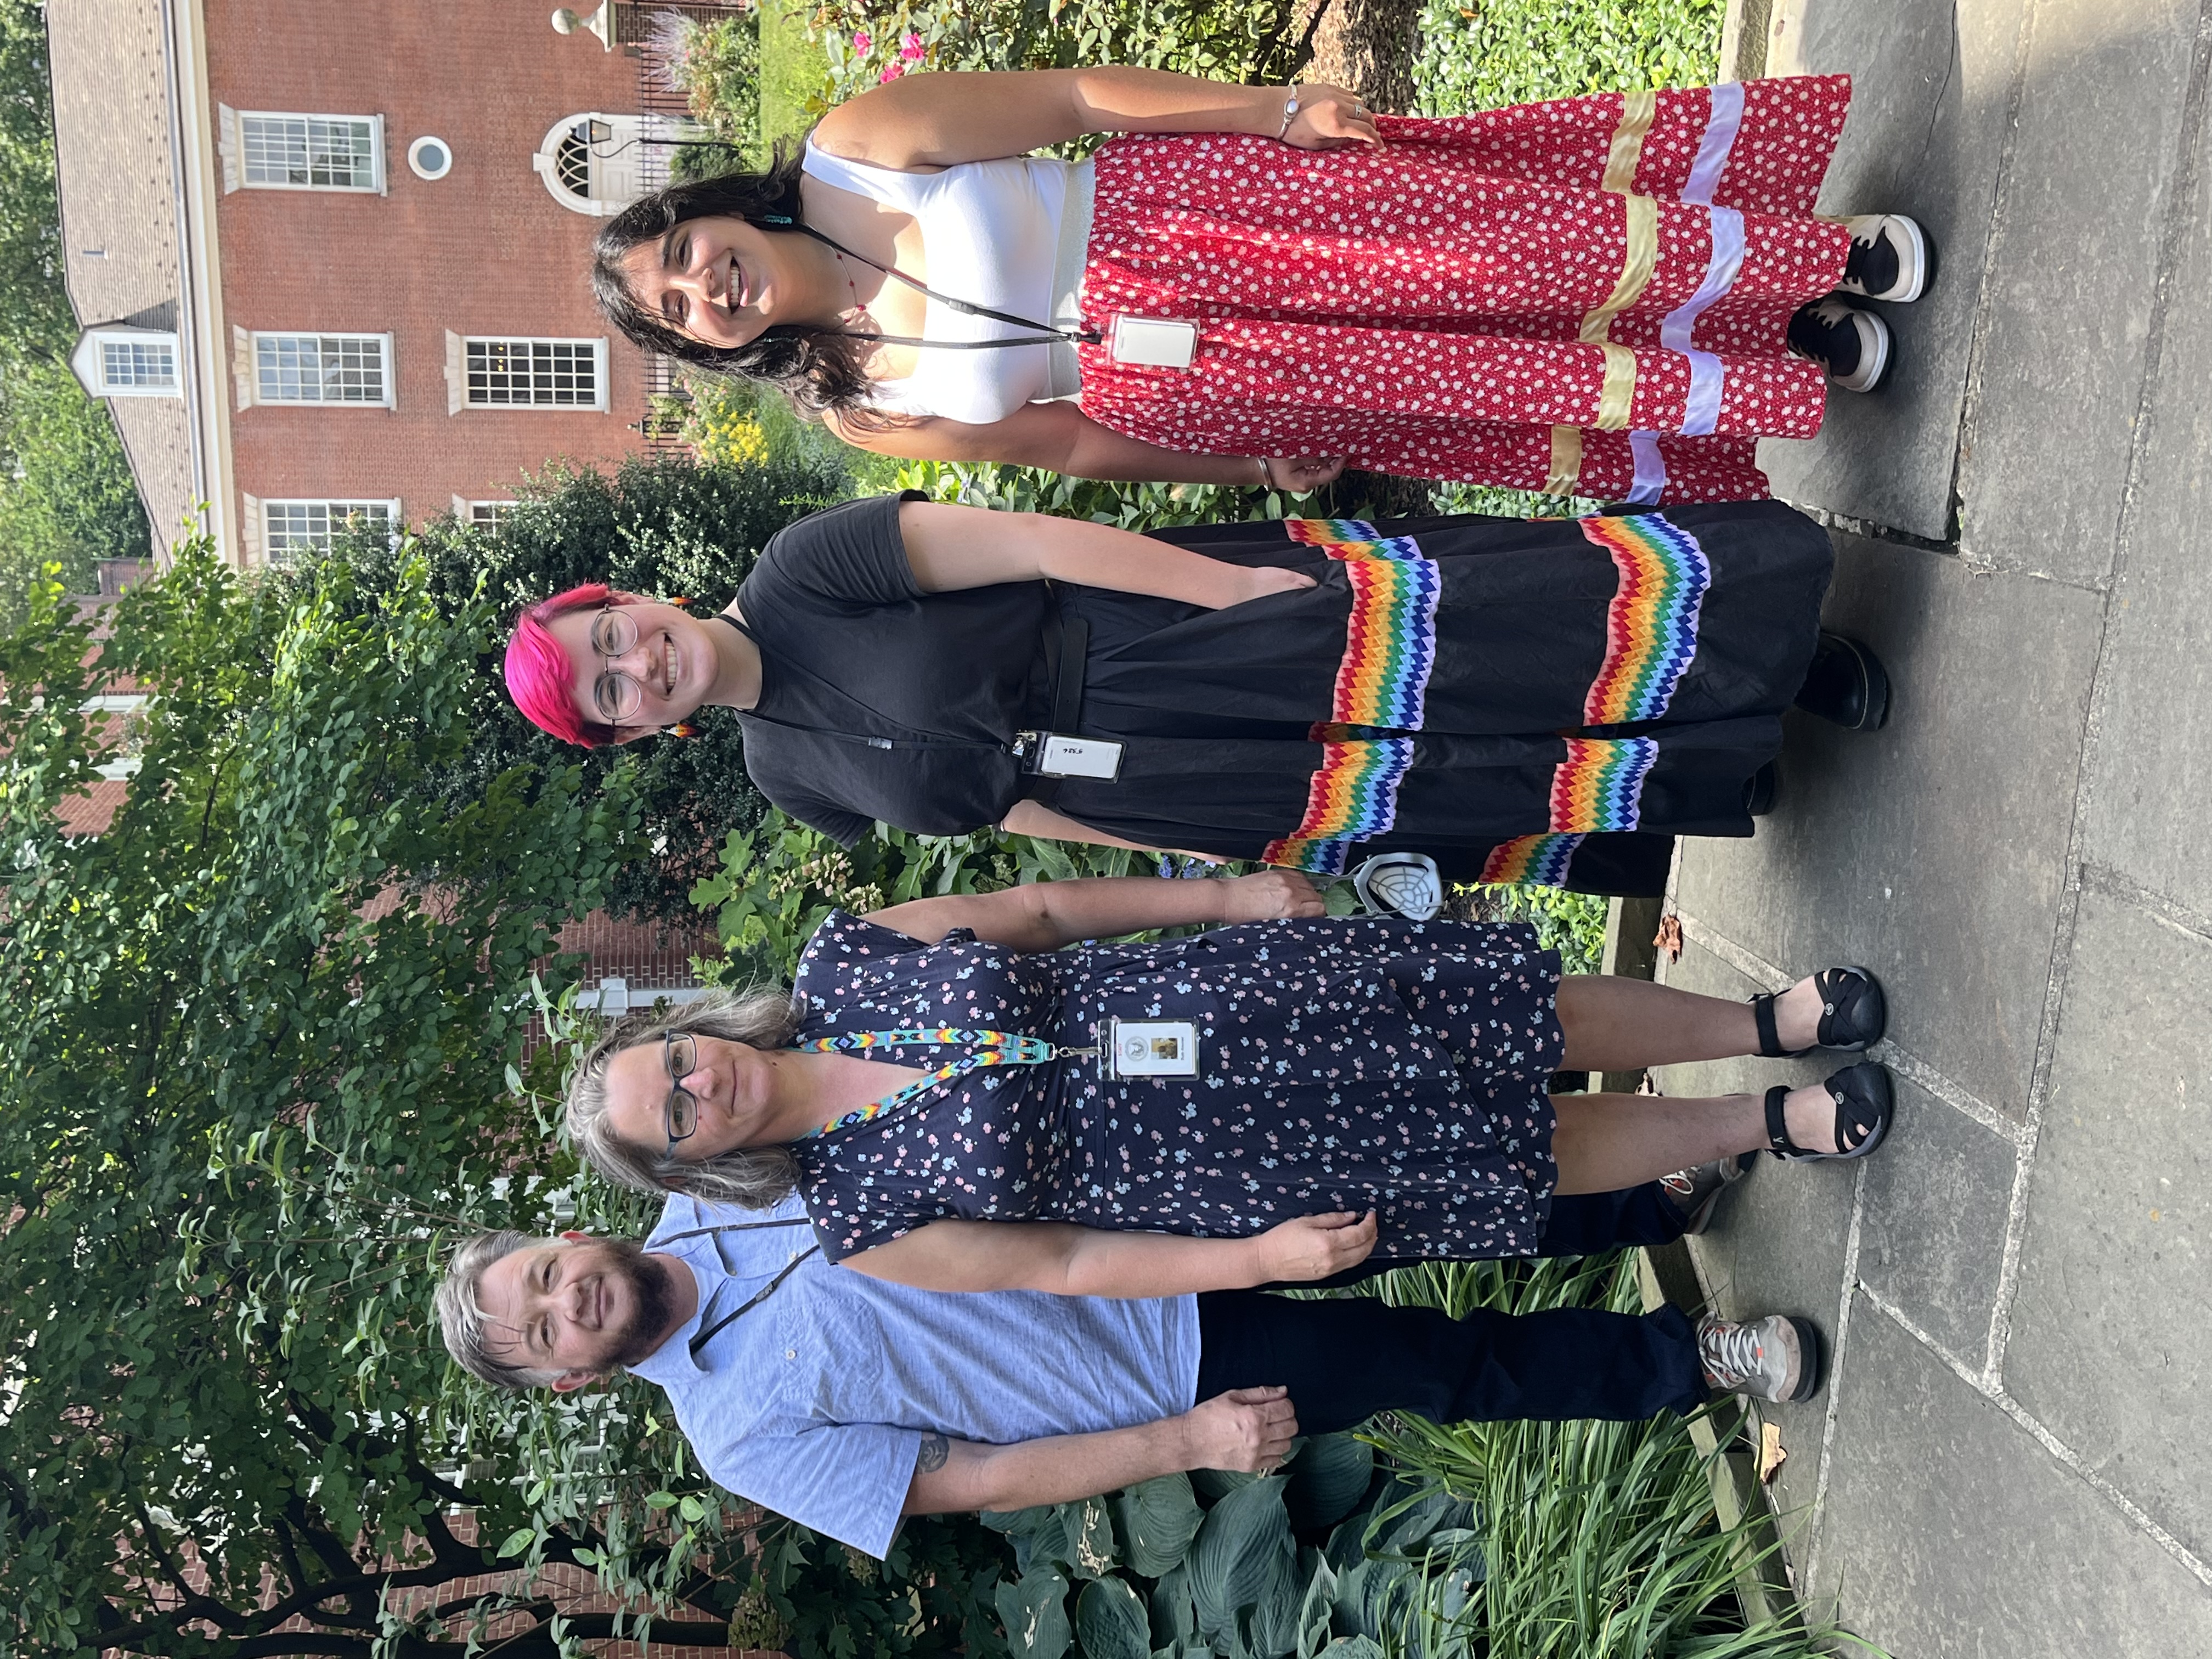 Group photo of 2022 NASI interns Gunnar Barnes, Katie McGhee, and Alexis Scalese, with NASI Engagement Coordinator Ruth Rouvier